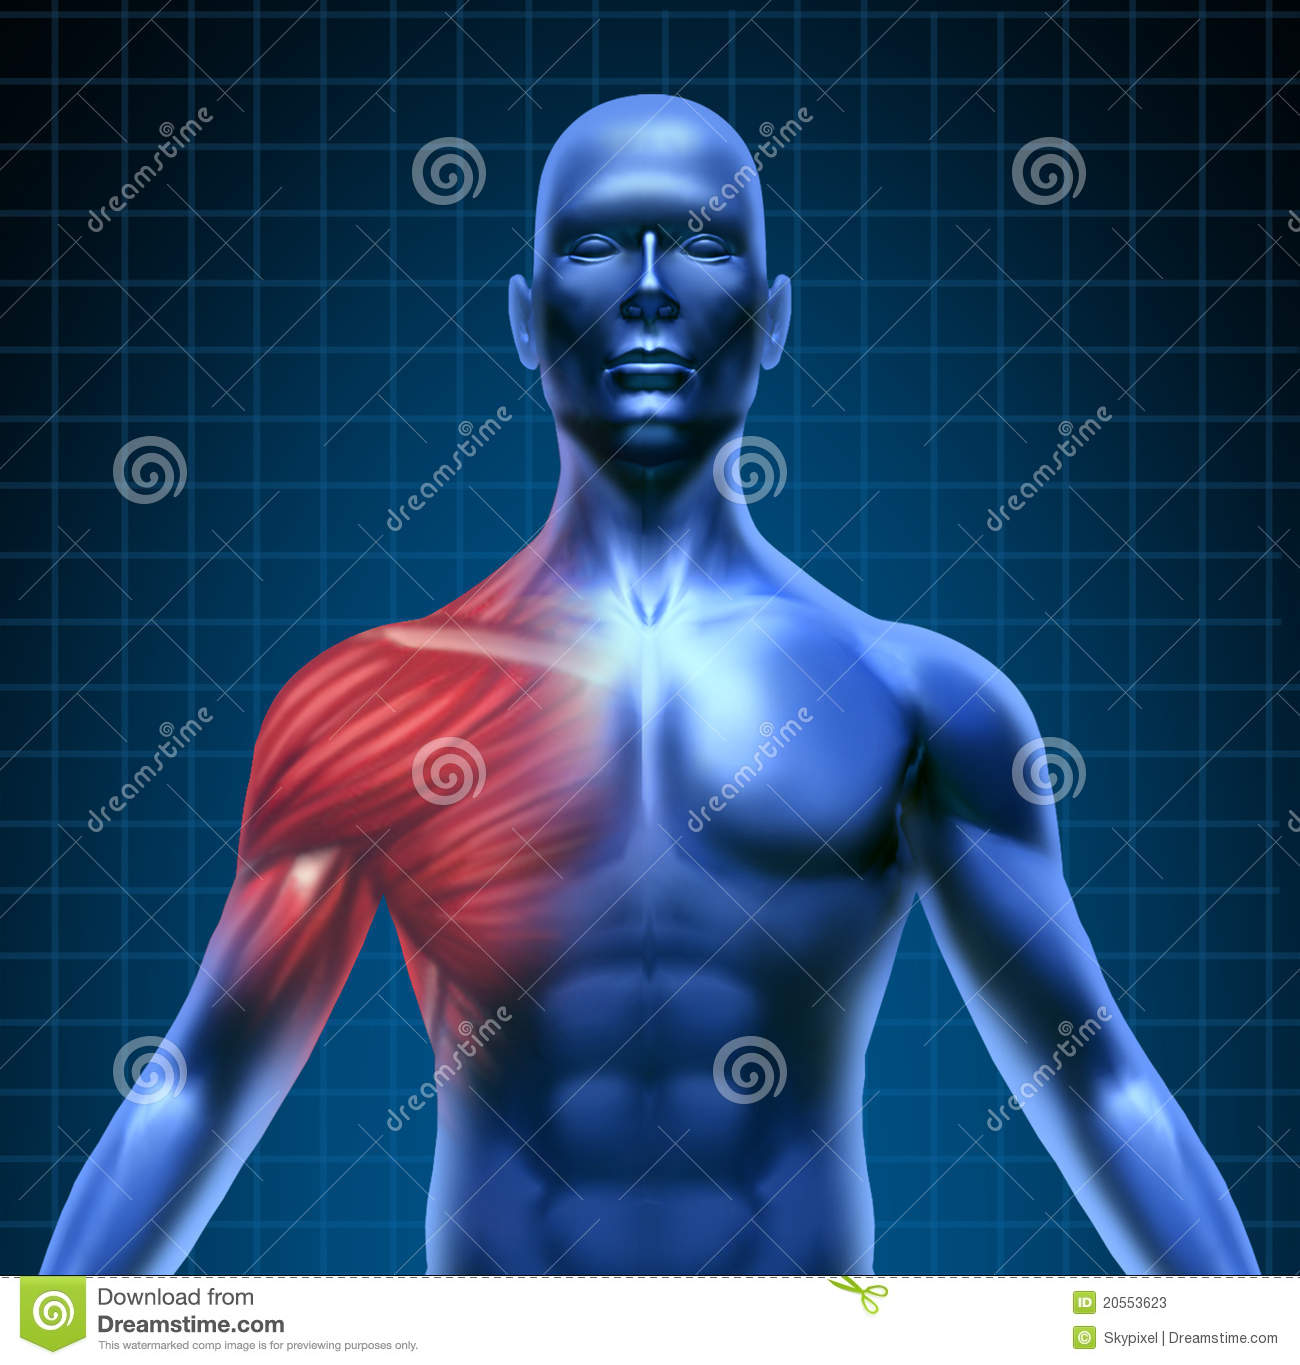 Muscle Pain Represented By A Blue Human Concept With The Red Shoulder    